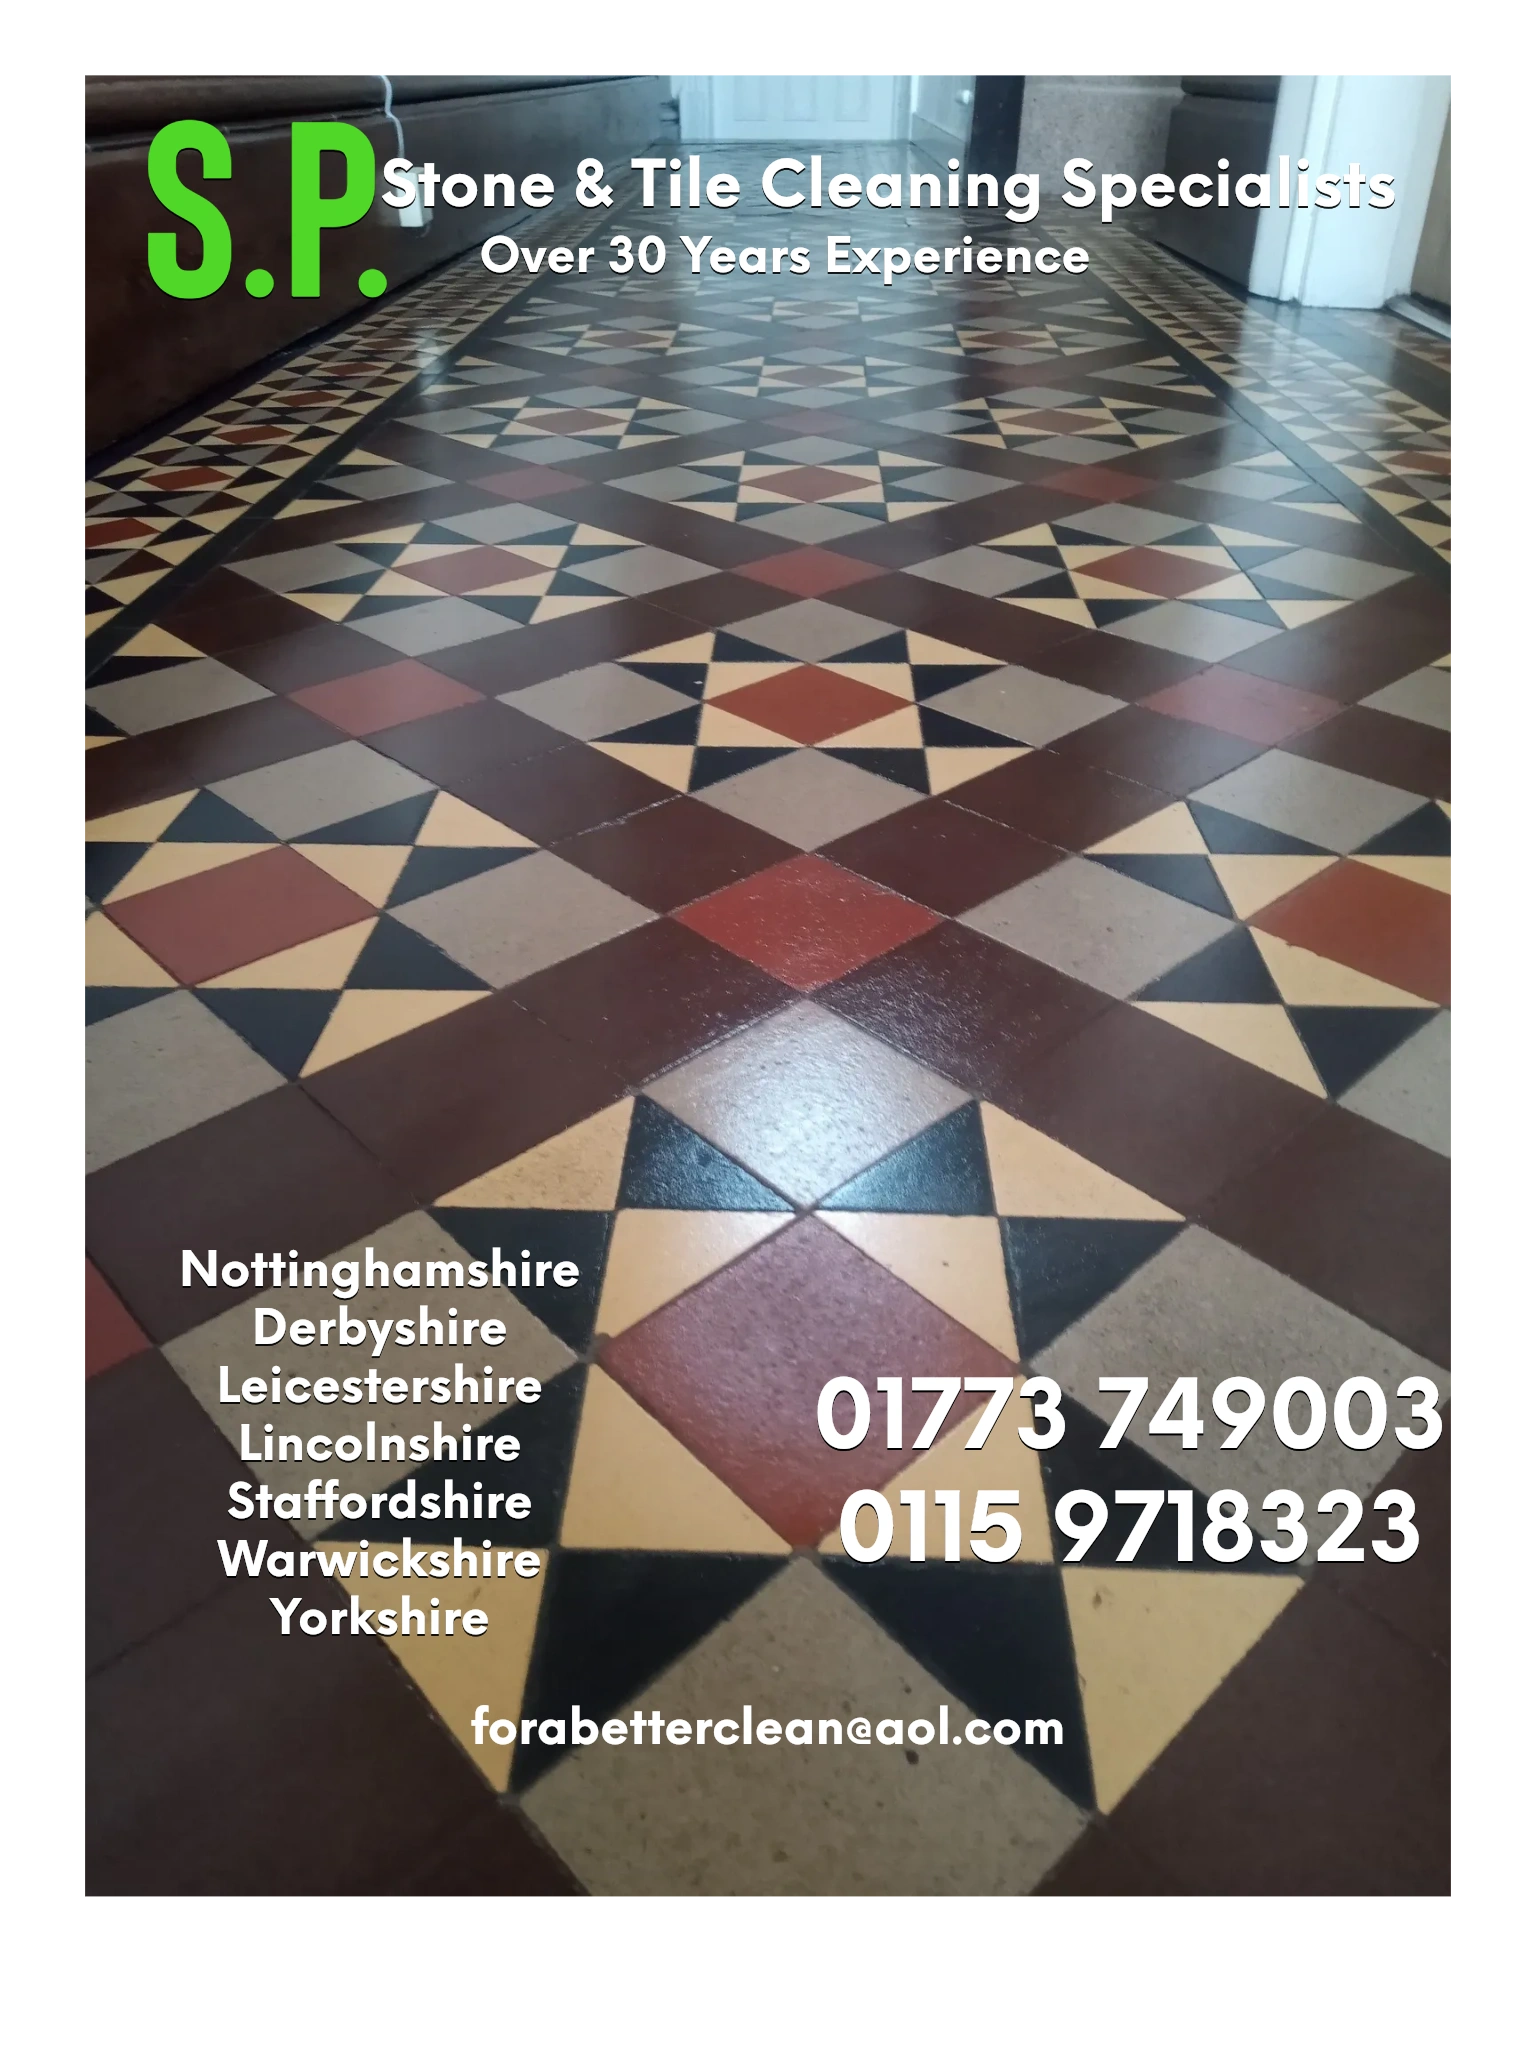 stone and tile floor cleaning services Nottinghamshire Derbyshire Warwickshire Leicestershire